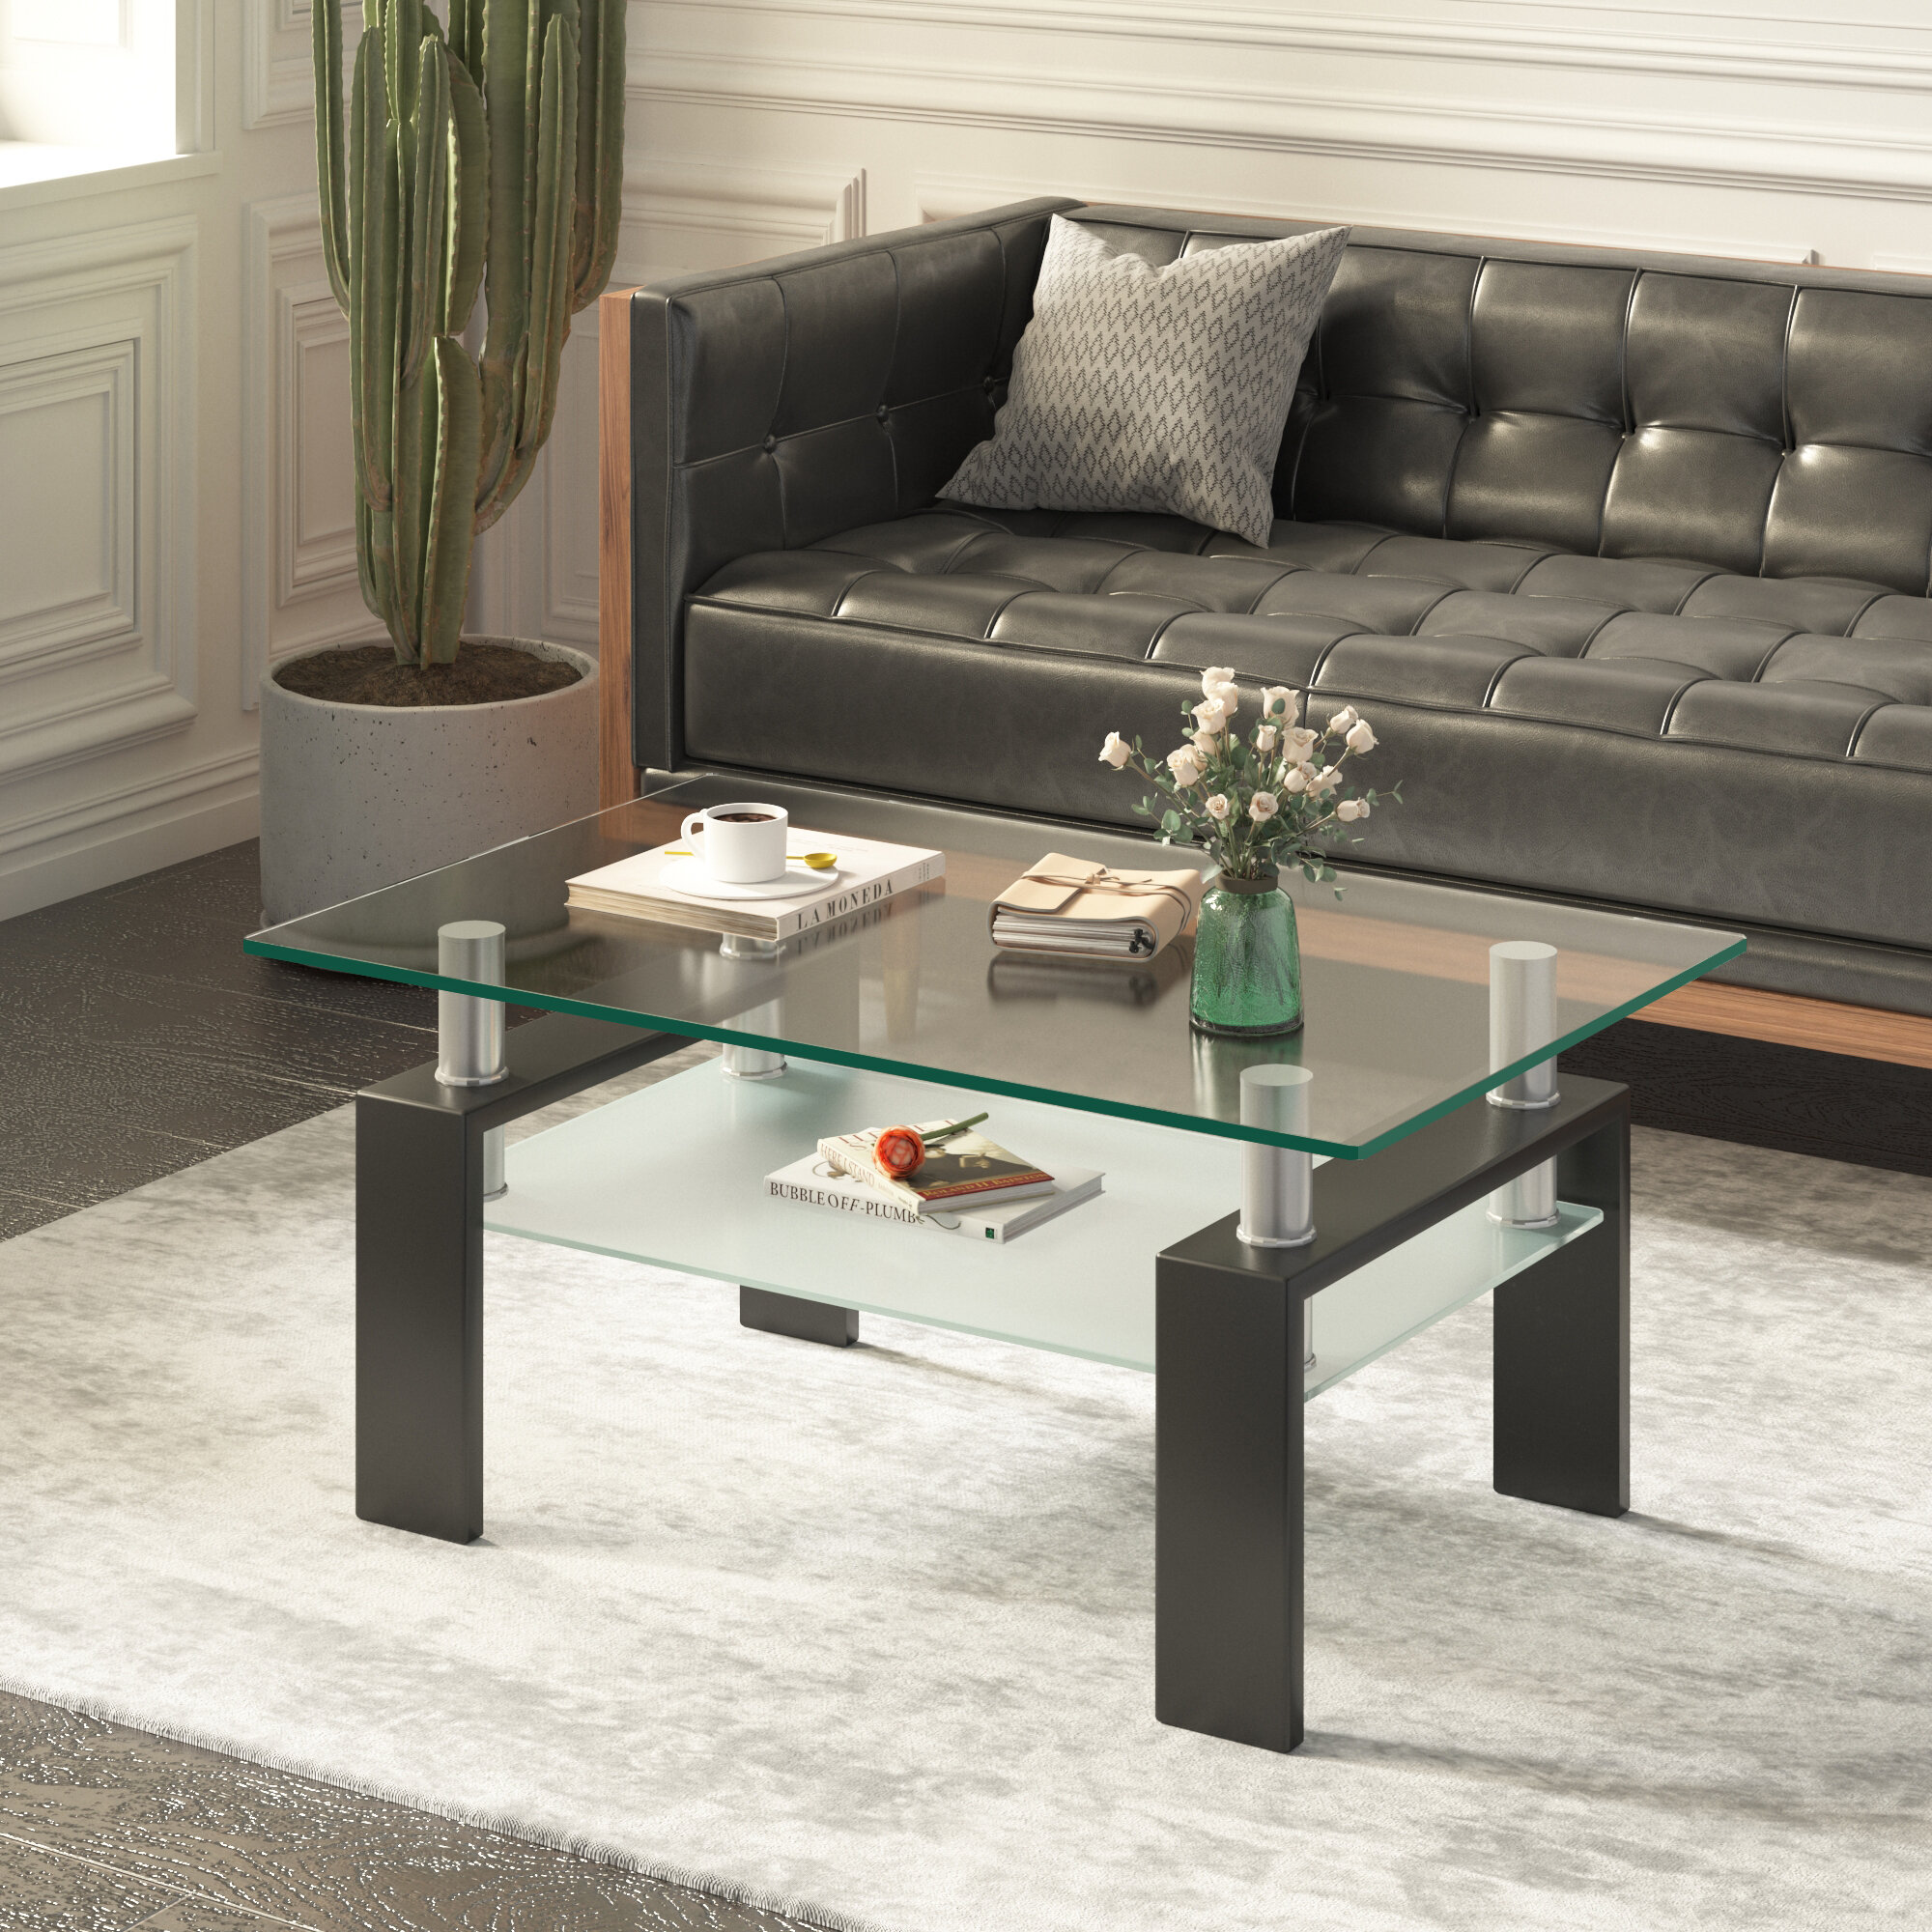 Modern Living Room Table with Lower Shelf Black Tempered Glass Top with Black Color Wooden Legs,Living Room Furniture,Waiting Area Table Living Room Rectangle Glass Coffee Table